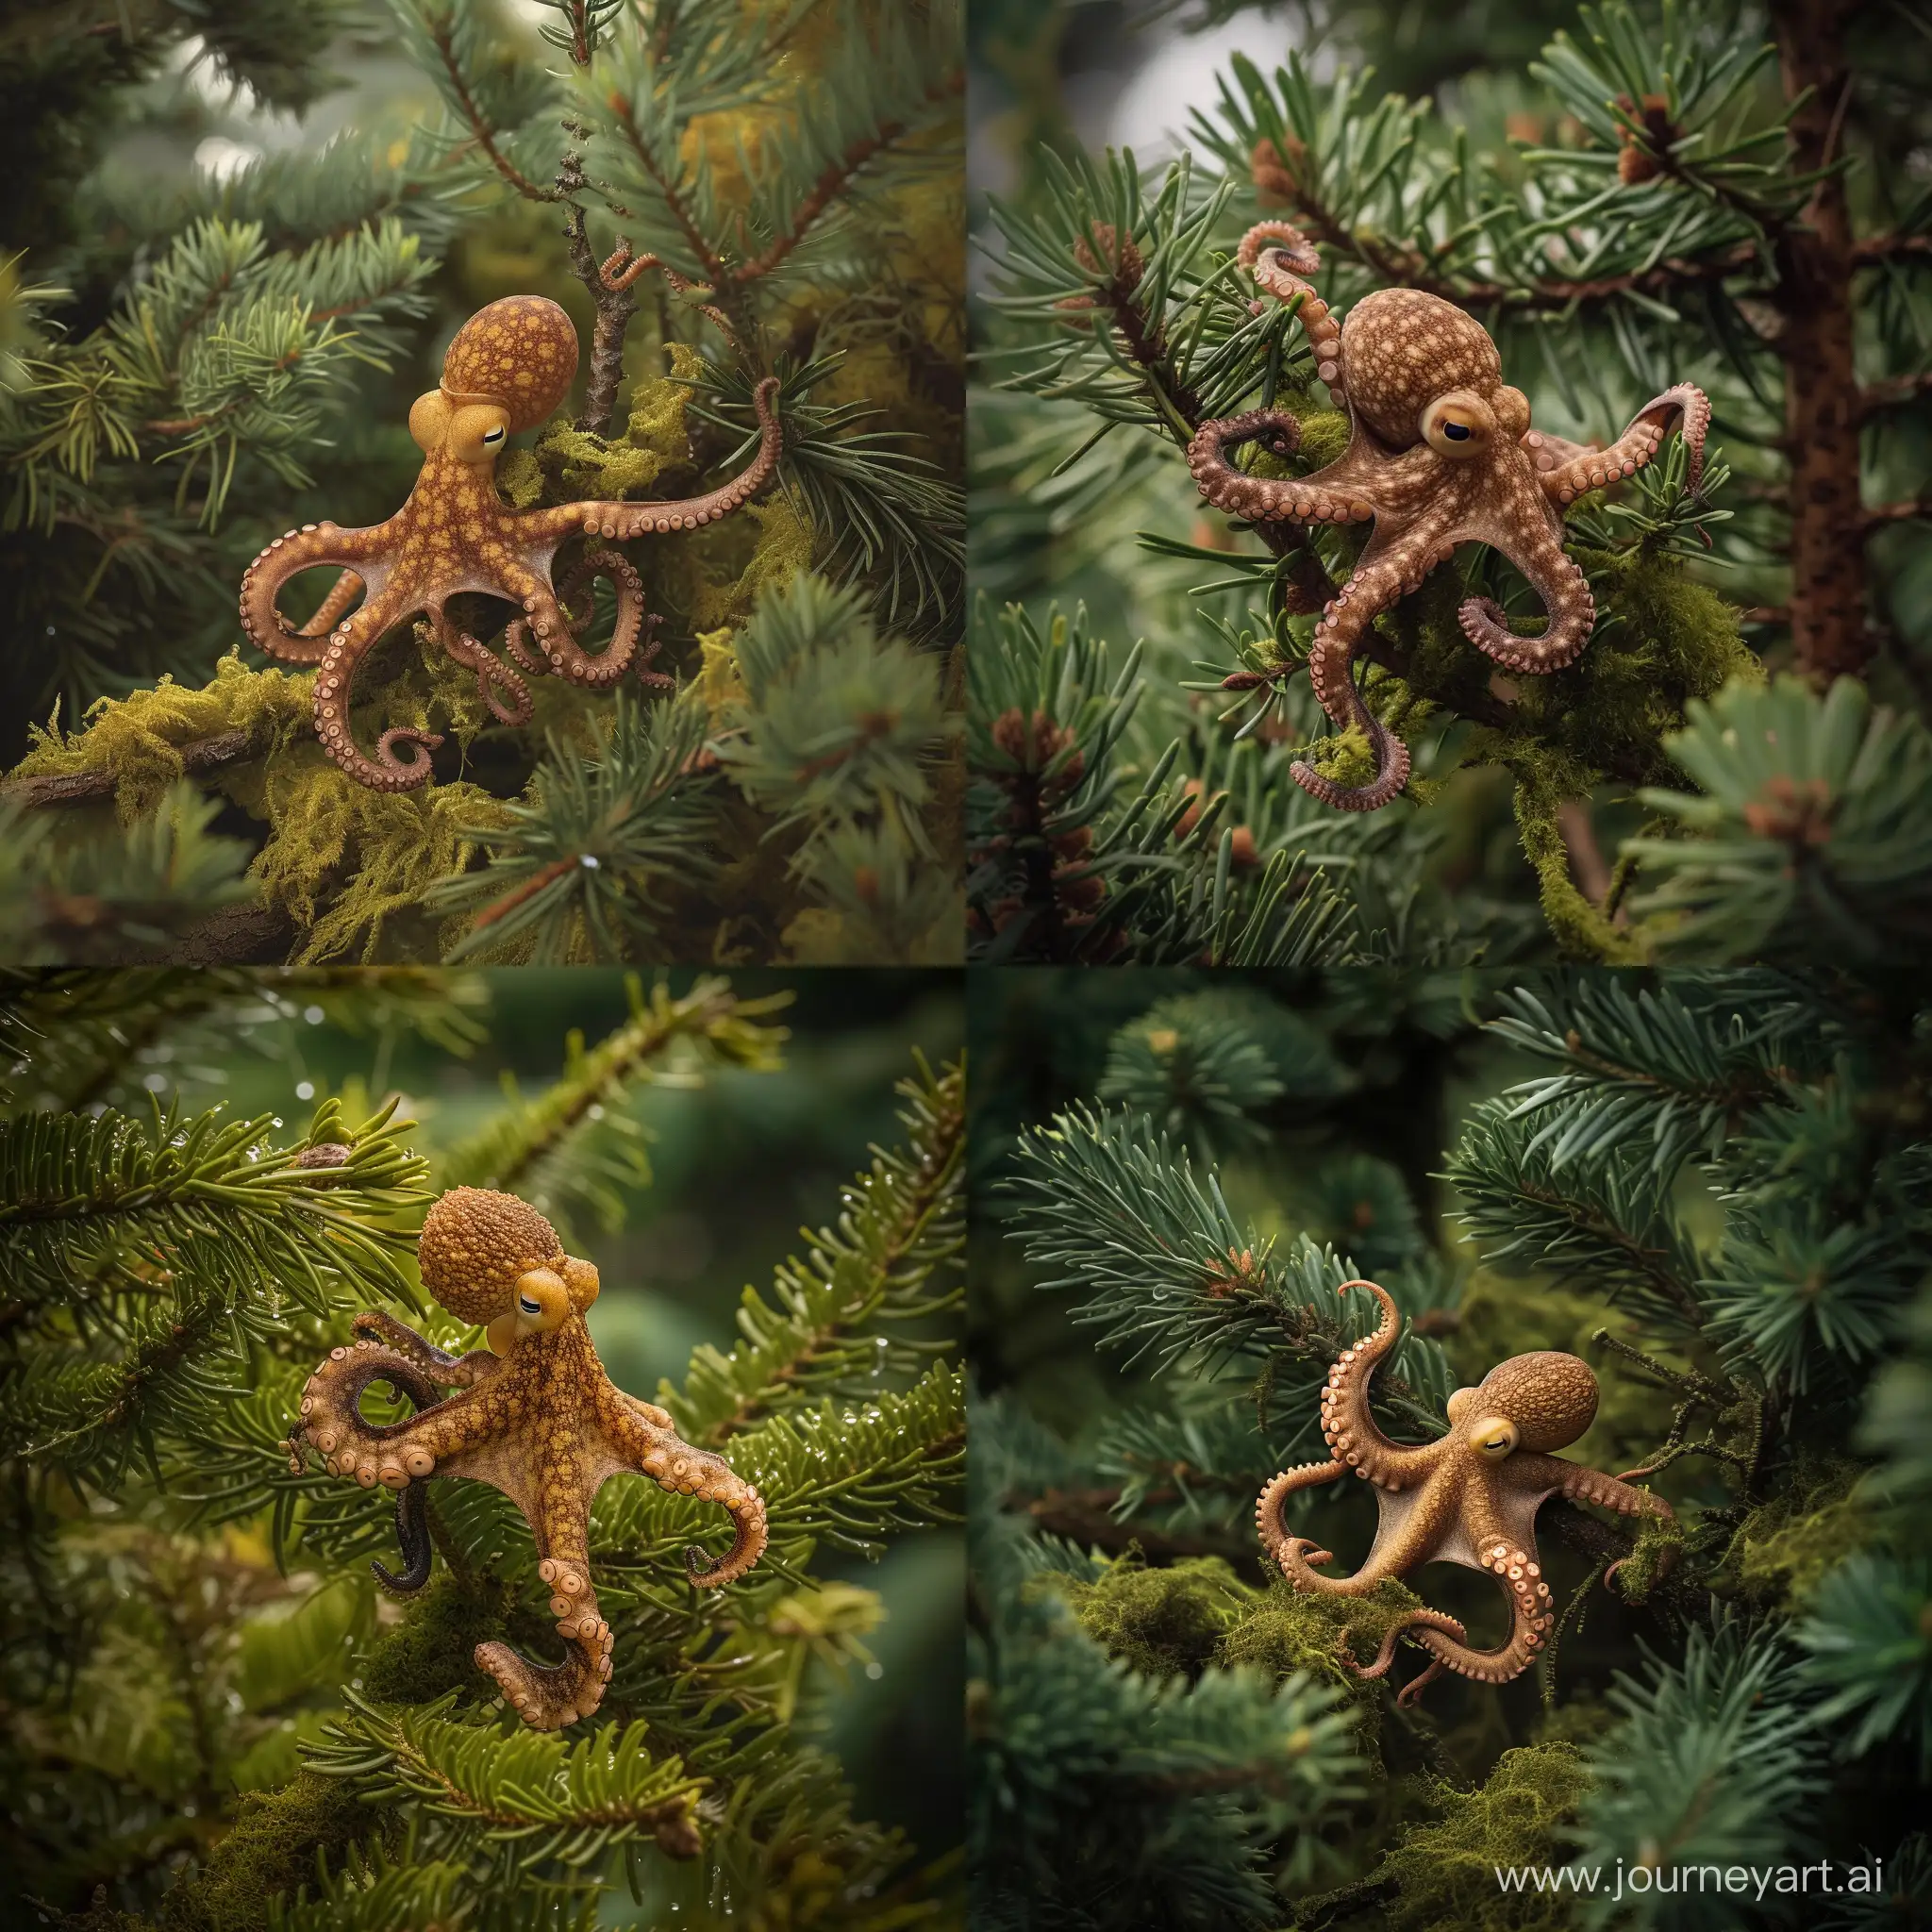 Adorable-Baby-Octopus-Clinging-to-Pine-Tree-Branches-in-Lush-Forest